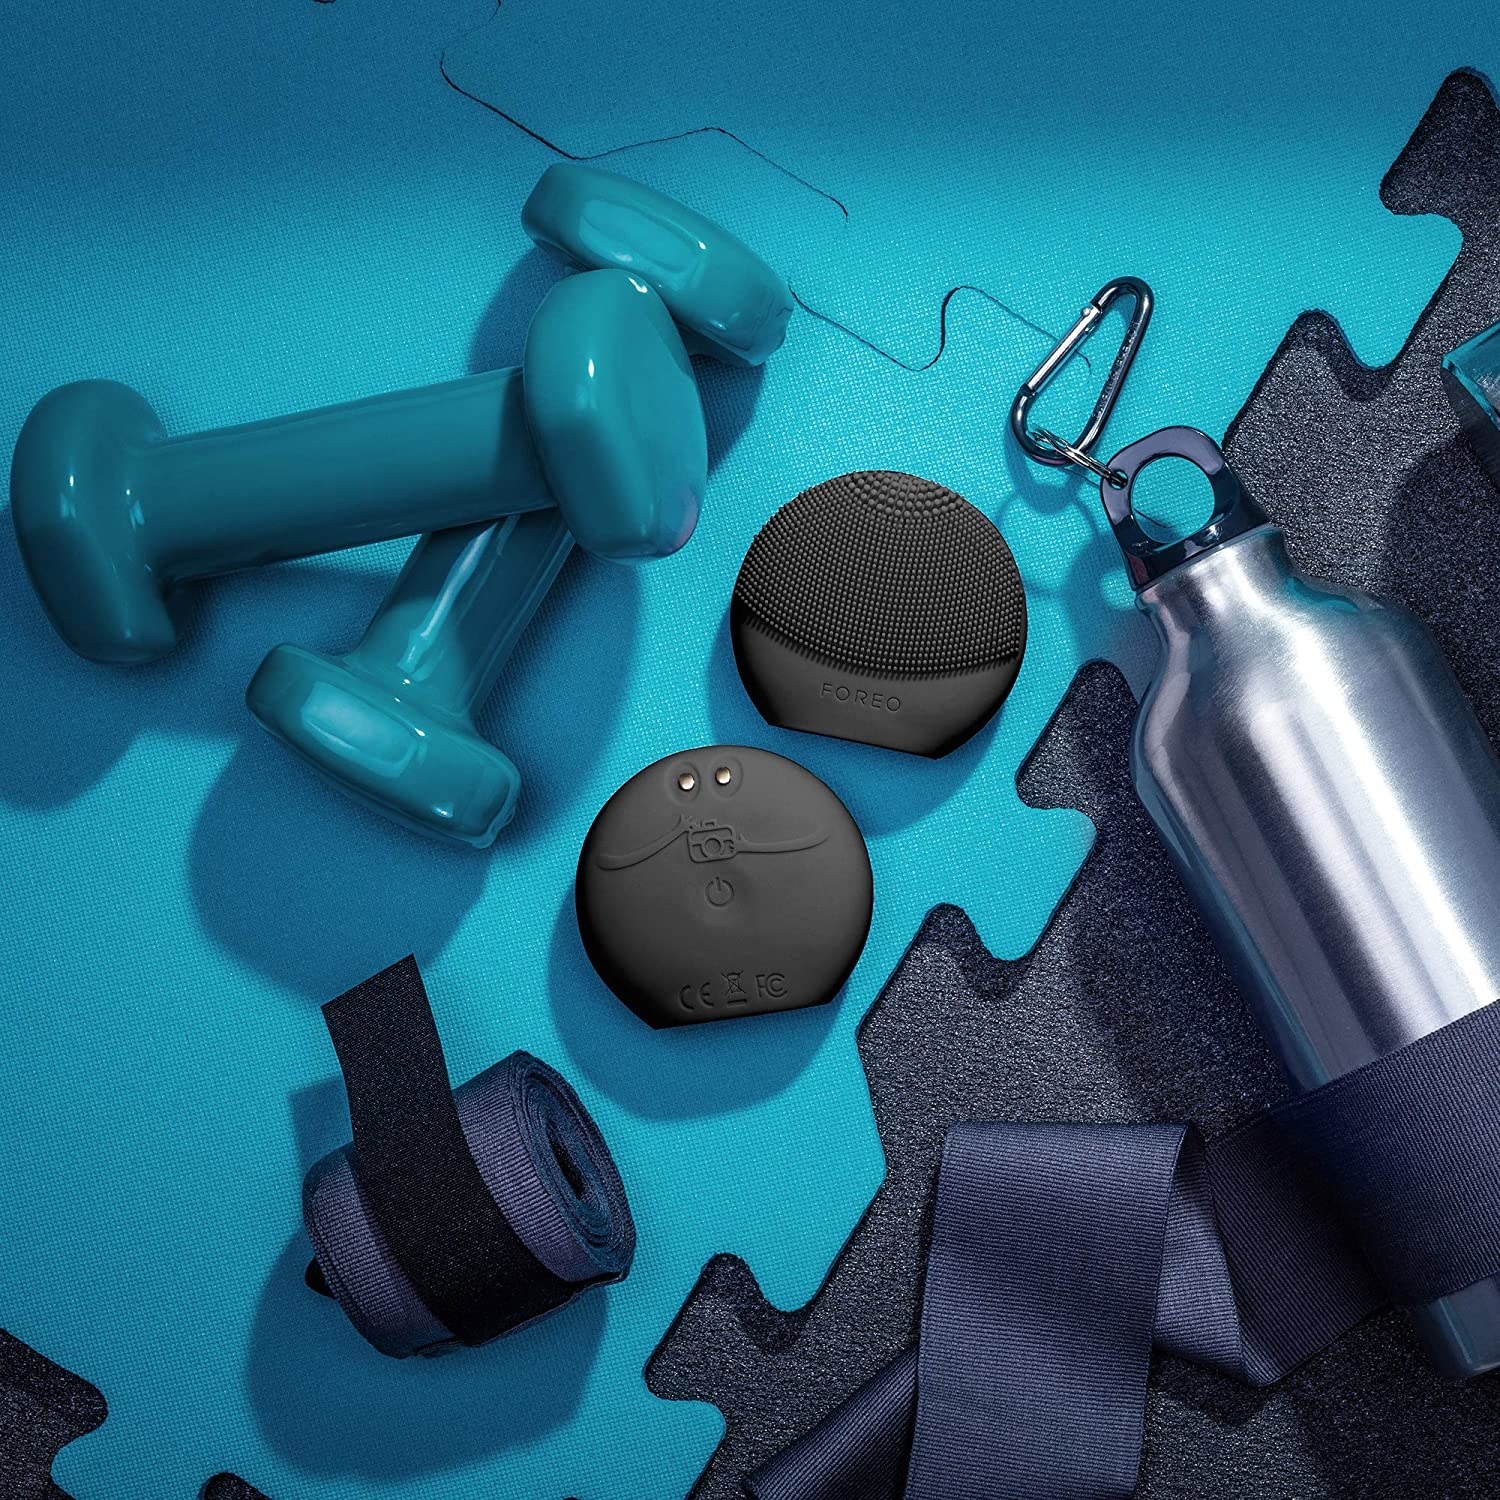 Two Foreo devices surround by gym equipment